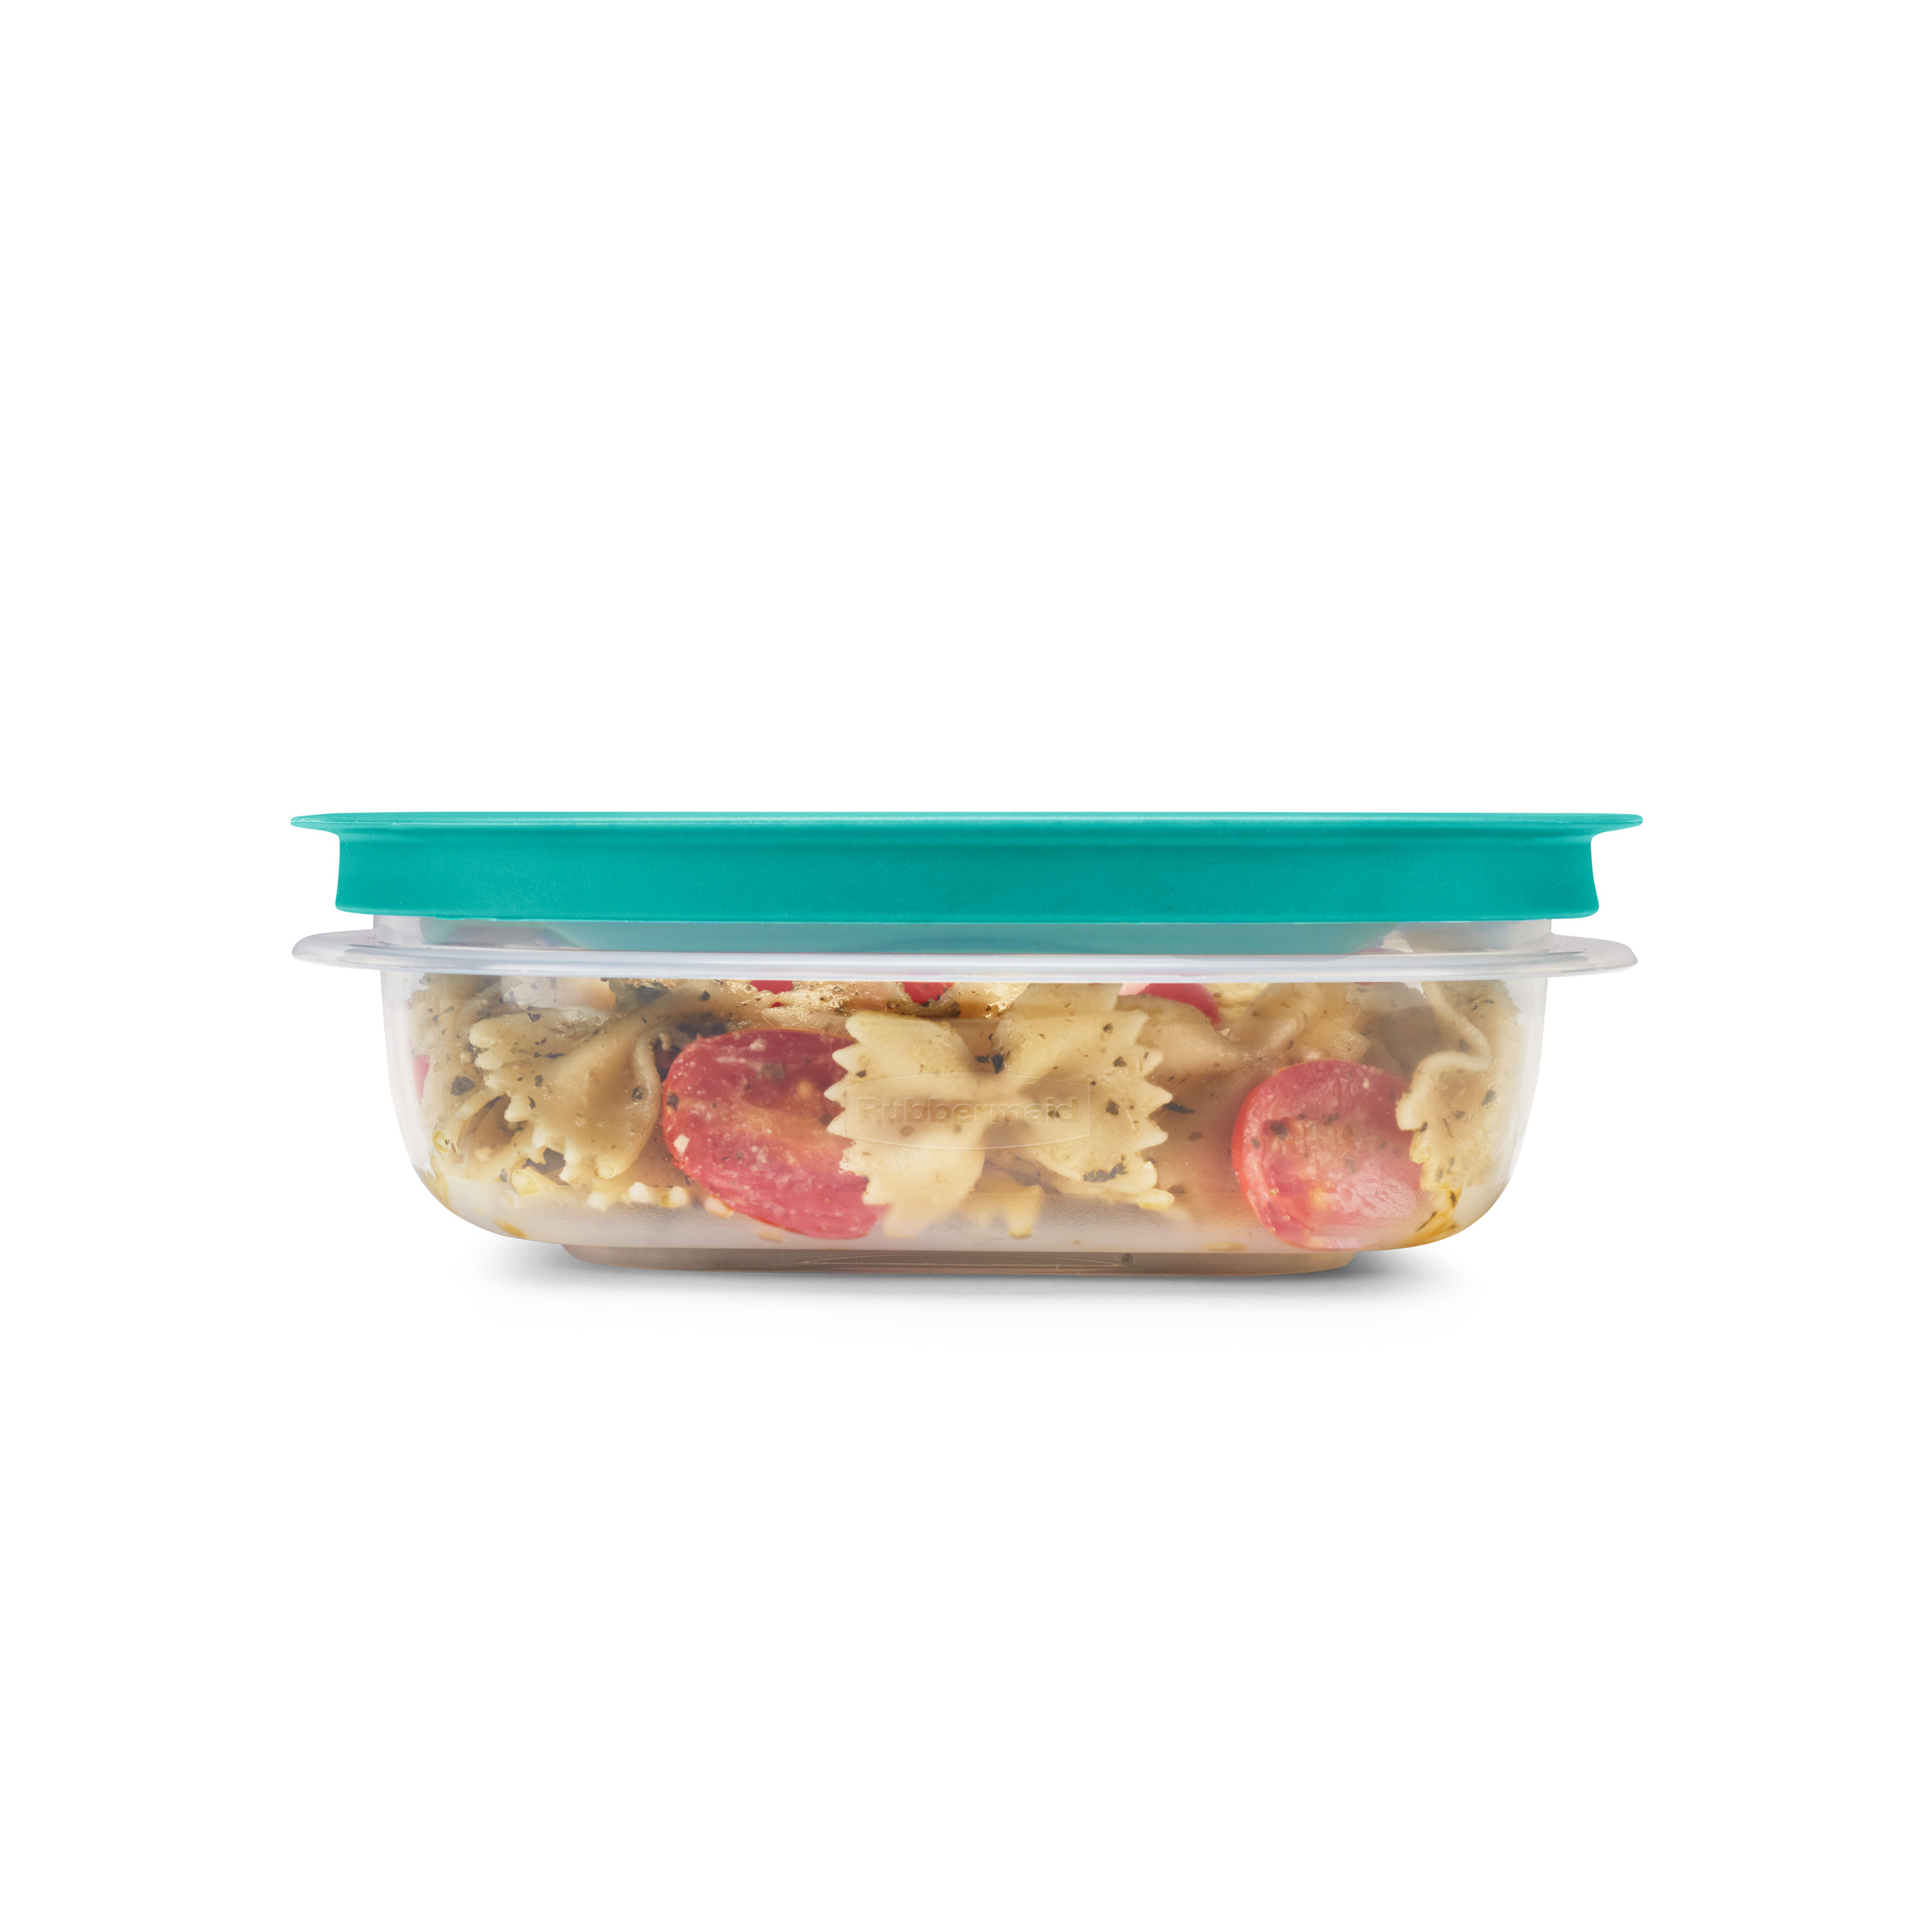 Rubbermaid Press & Lock Easy Find Lids Food Storage Containers, 42-Piece Set - image 2 of 8